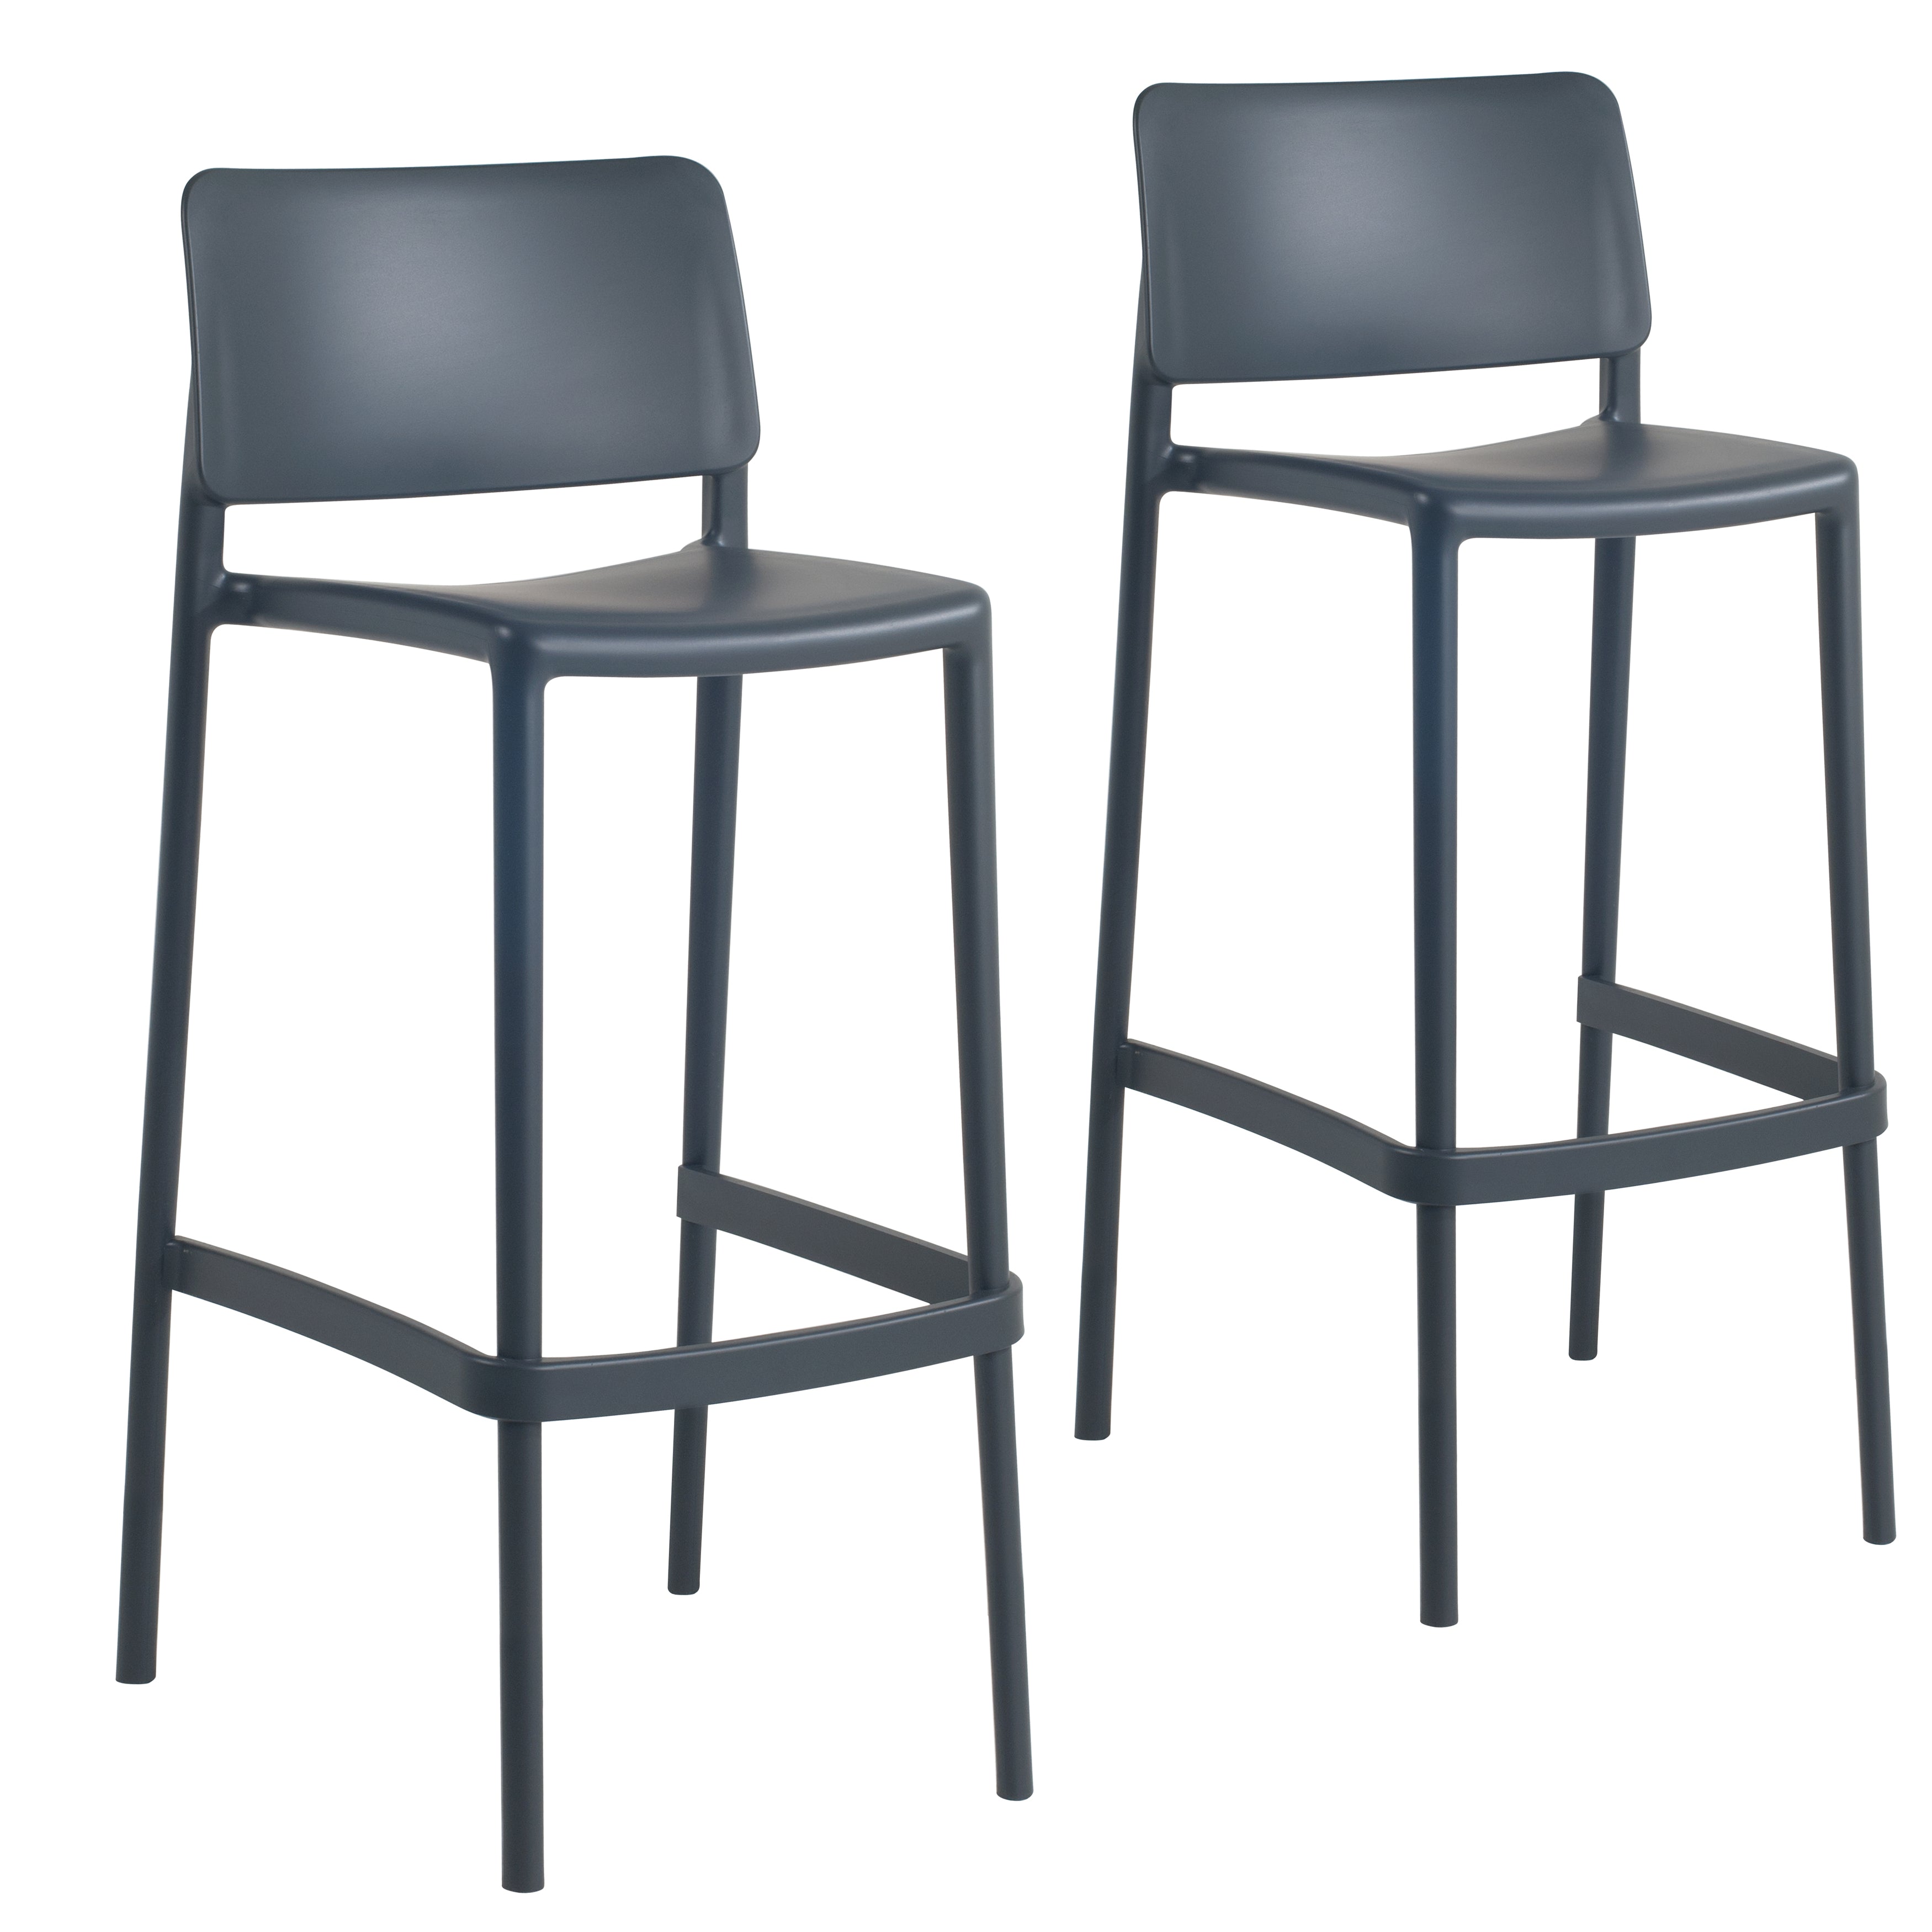 Cleo Patio Plastic Stackable Bar Height Bar Stool in Anthracite Black - (Set of 2)